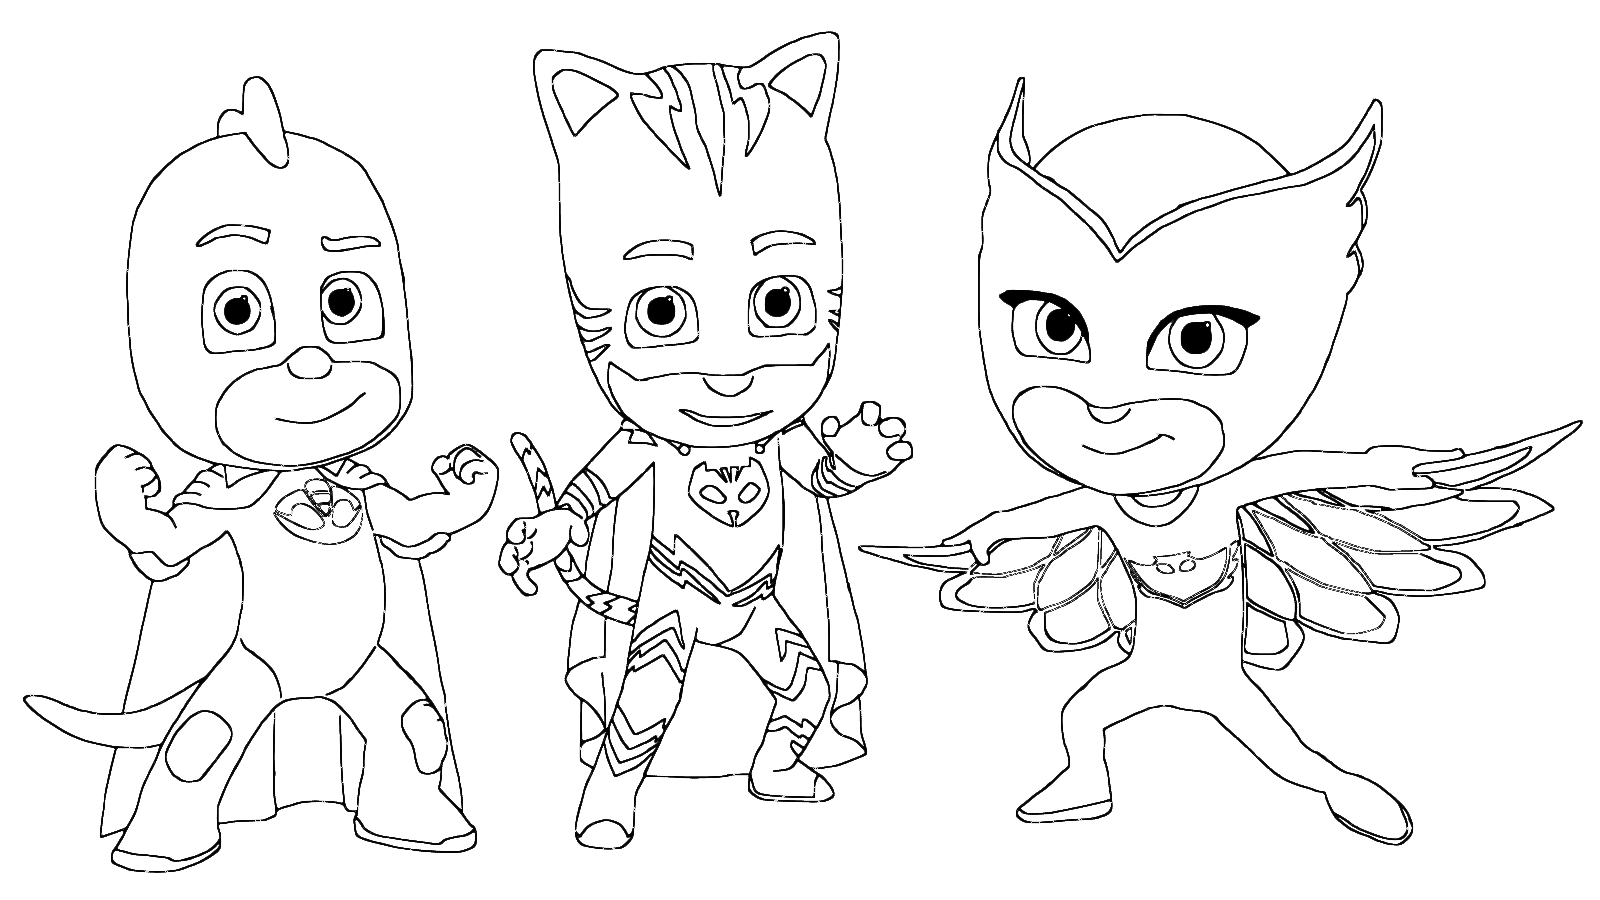 Catboy Coloring Pages at GetDrawings.com | Free for personal ...